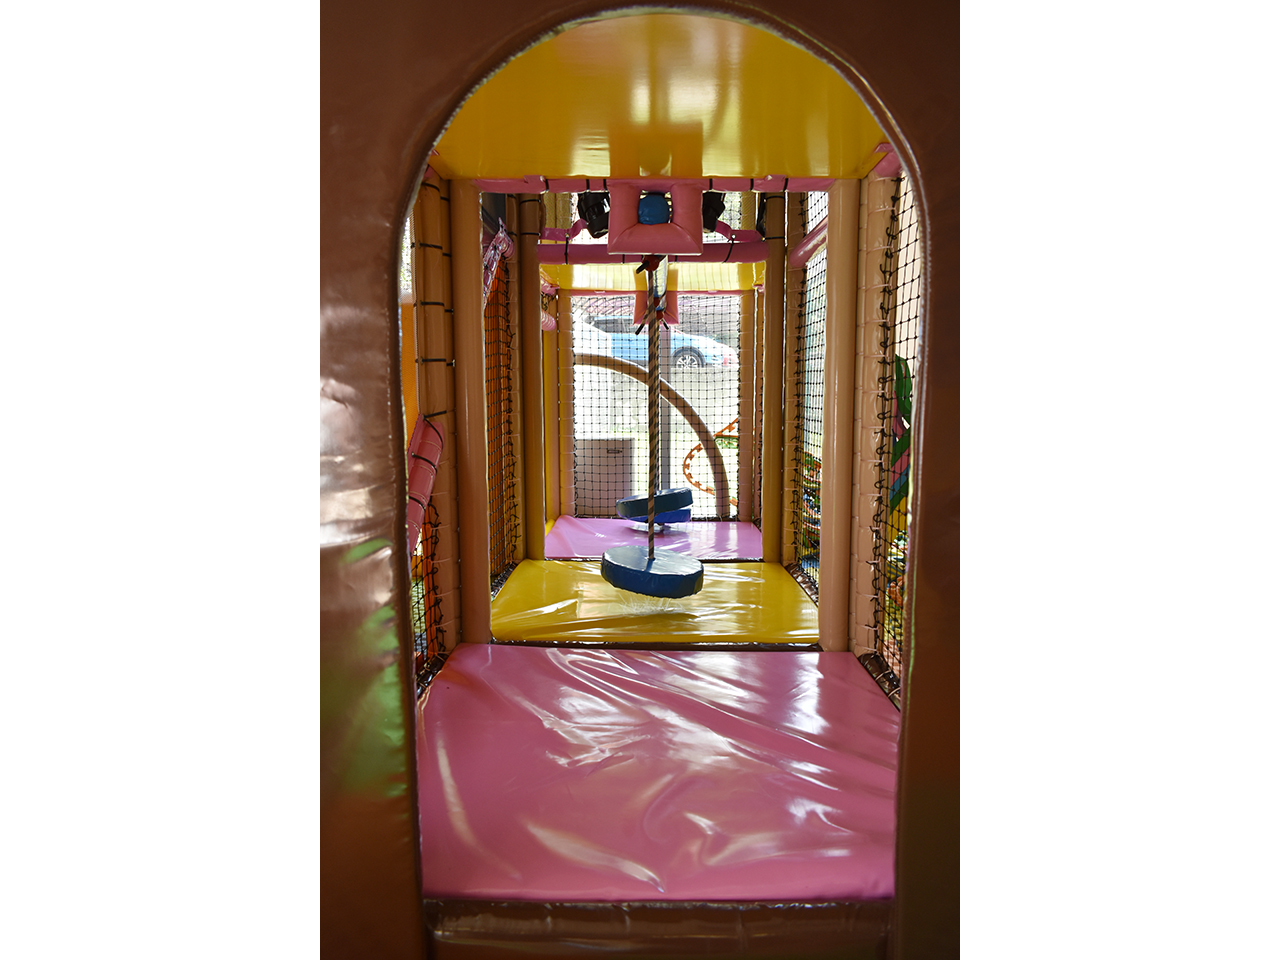 CAFE AND CHILDREN'S PLAYROOM SPARTANAC Kids playgrounds Beograd